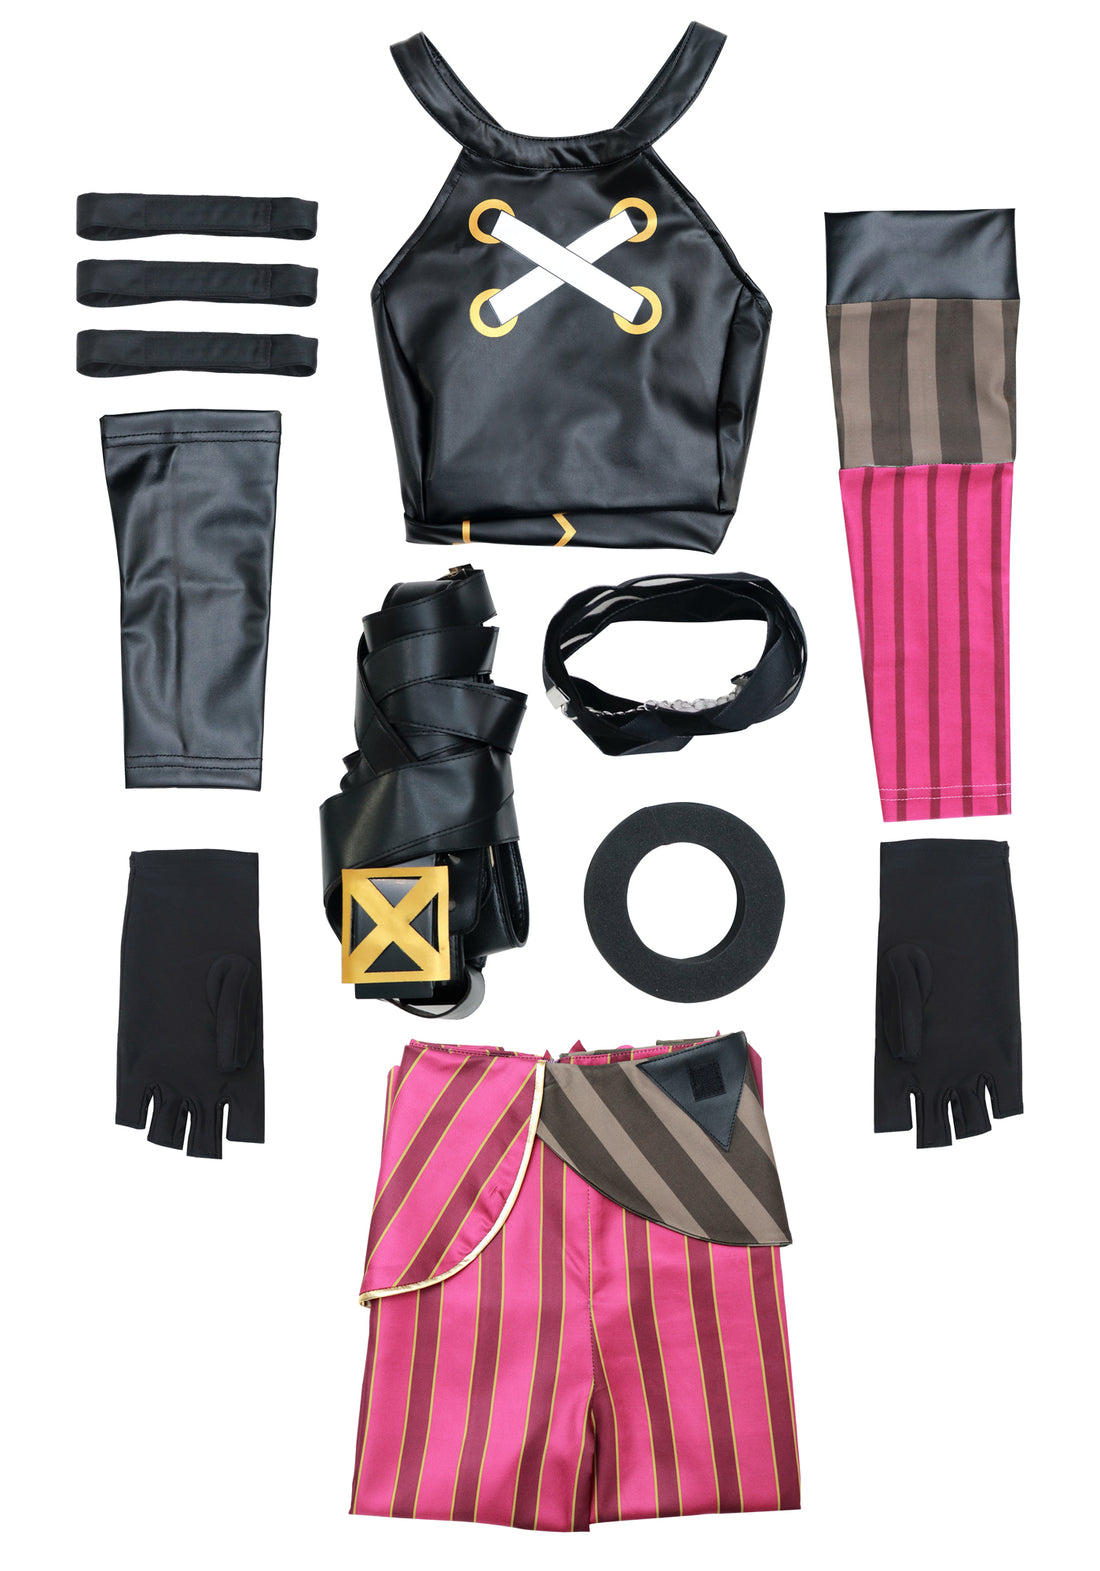 Women Powder Cosplay Costume Outfit 